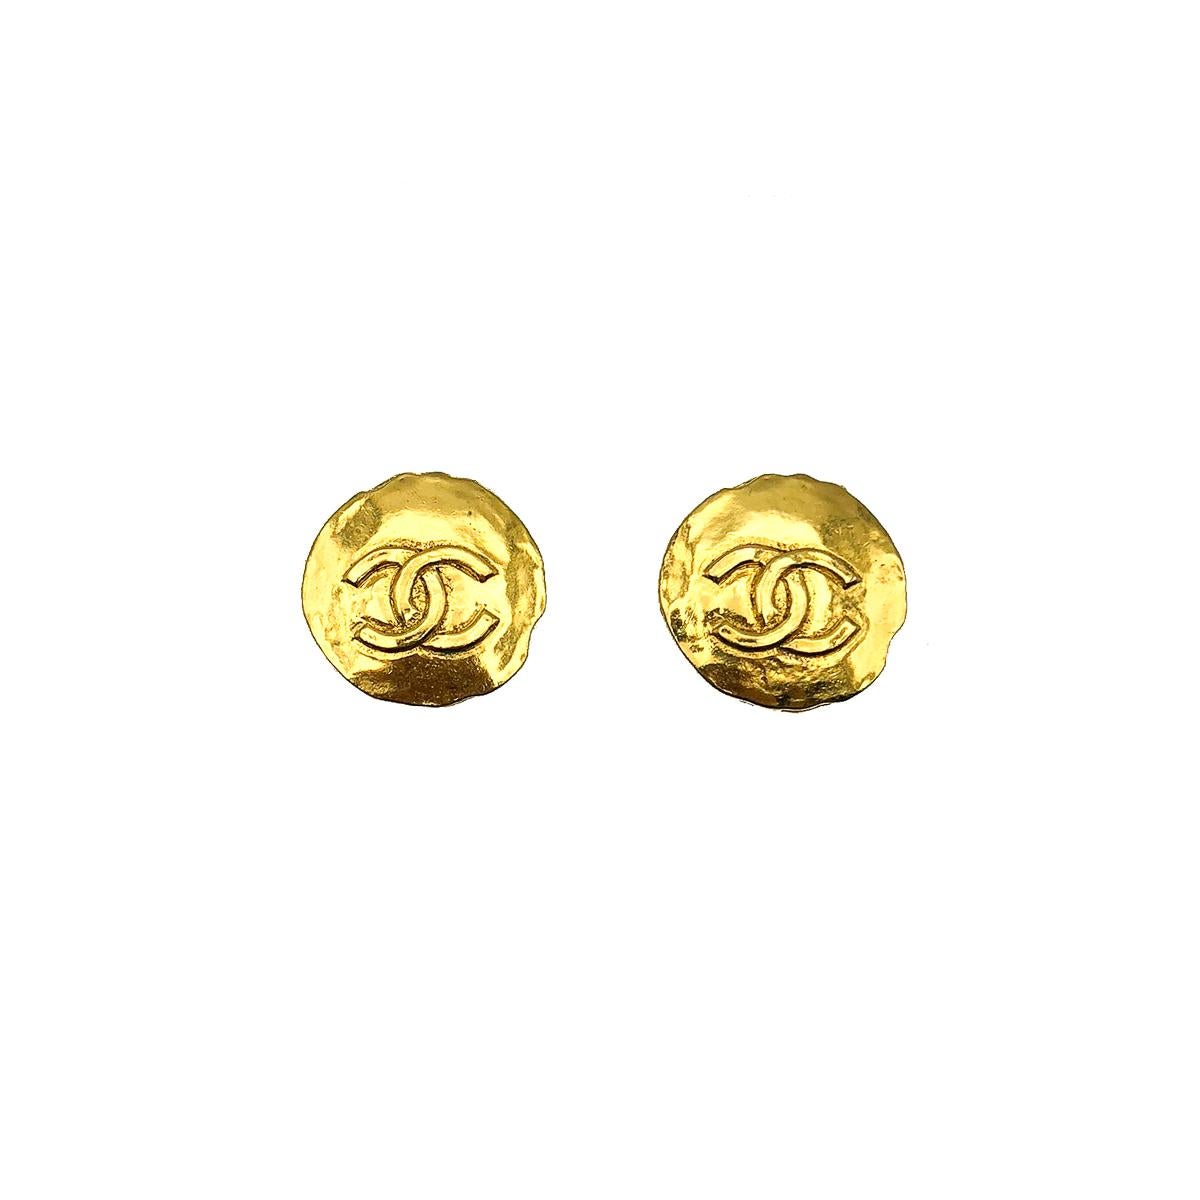 An earlier pair of Vintage CC Logo Coin Earrings. Dating to the late 1970s, early 1980s. Crafted in gold plated metal. Featuring the iconic interlocking CC logo upon a byzantine coin inspired disc. In very good condition without damage or wear,